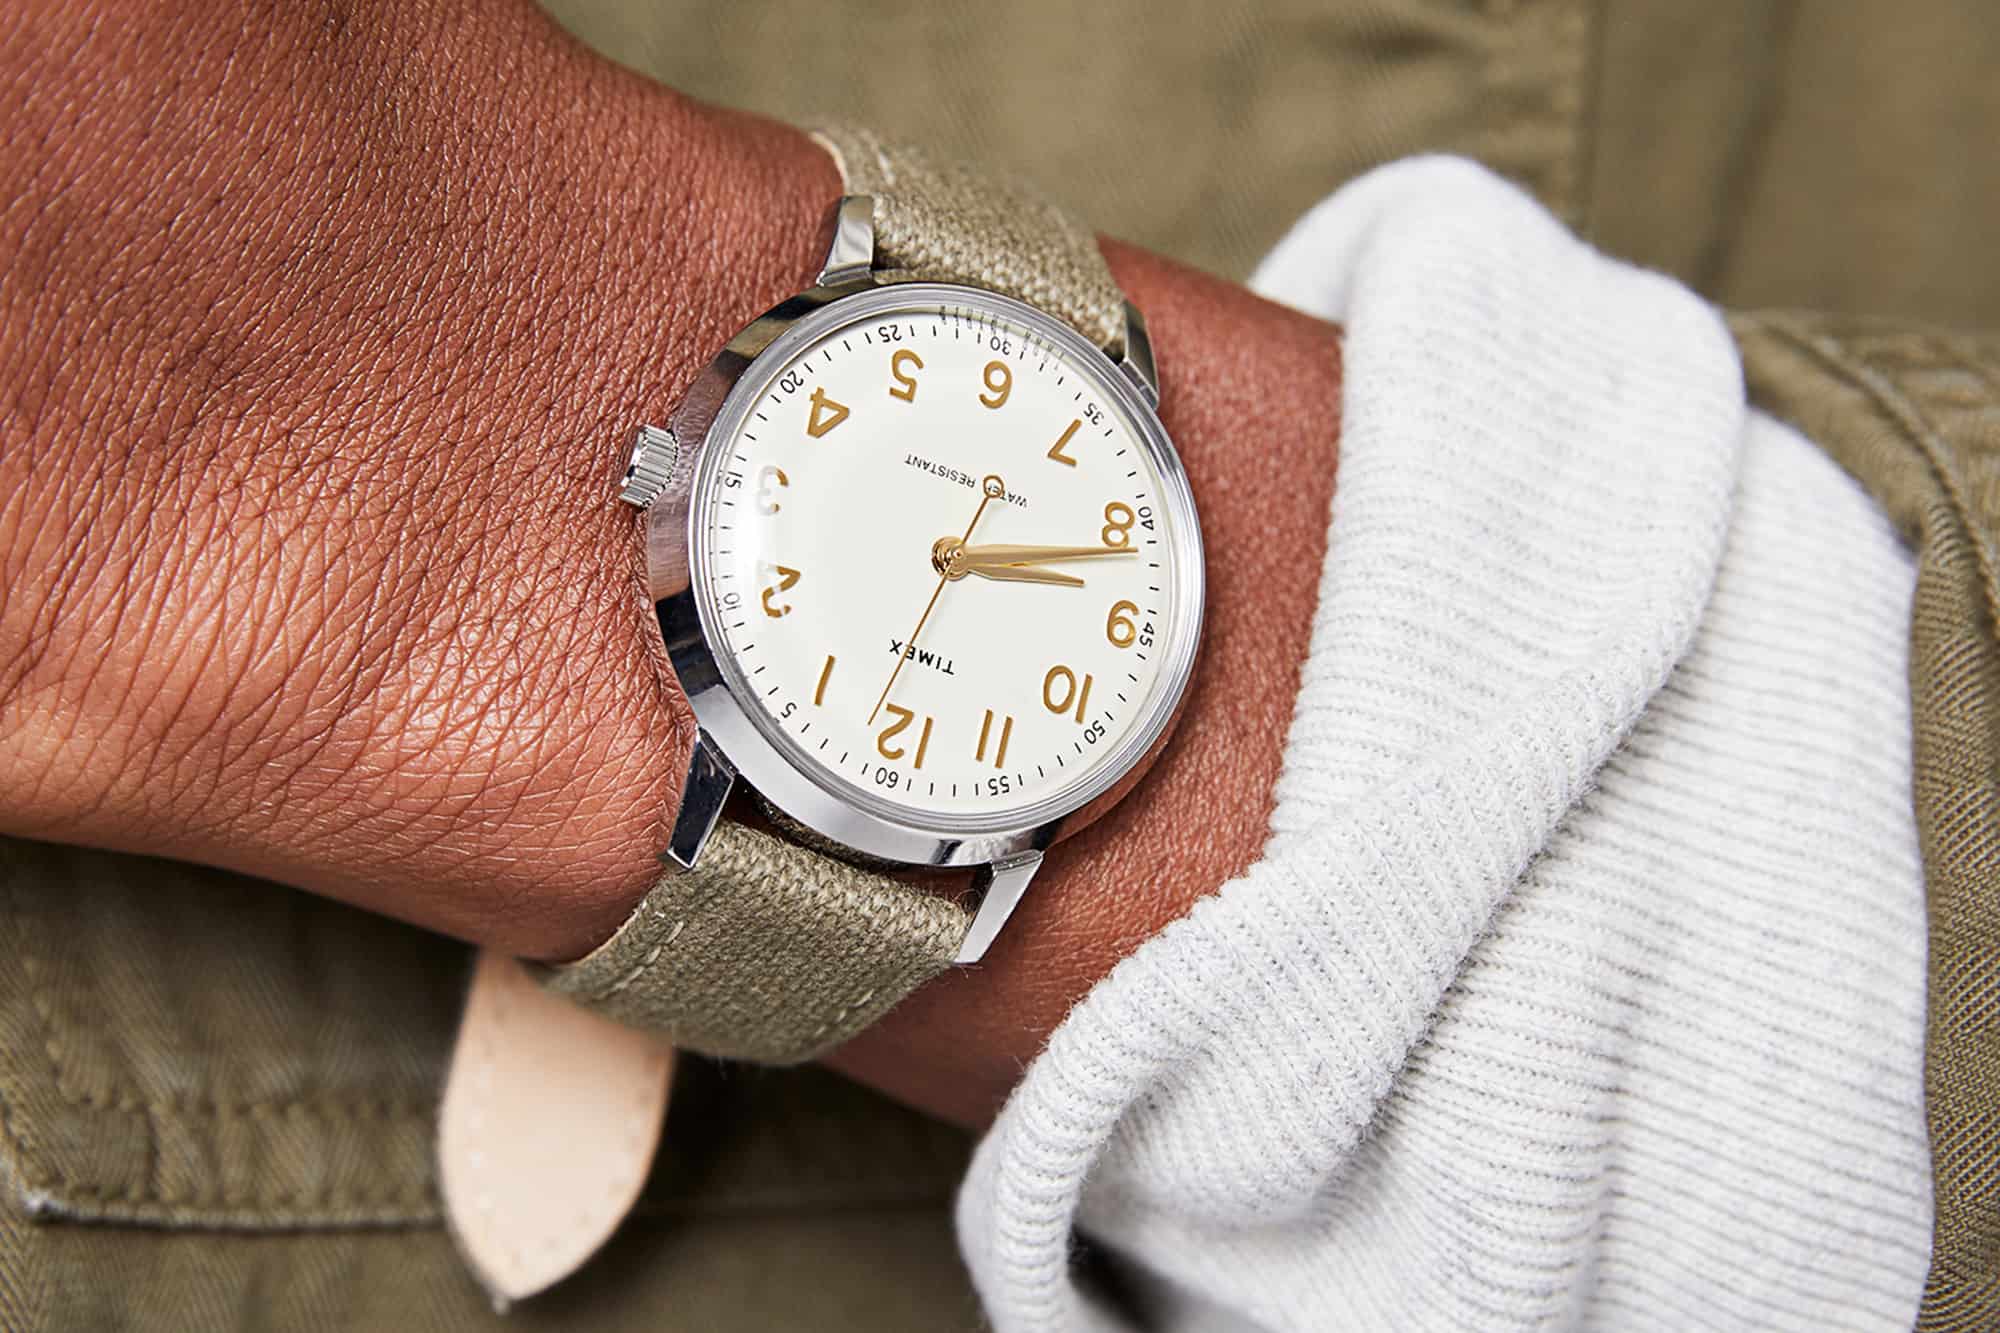 Todd Snyder and Timex Team Up Again to Celebrate the Historic 